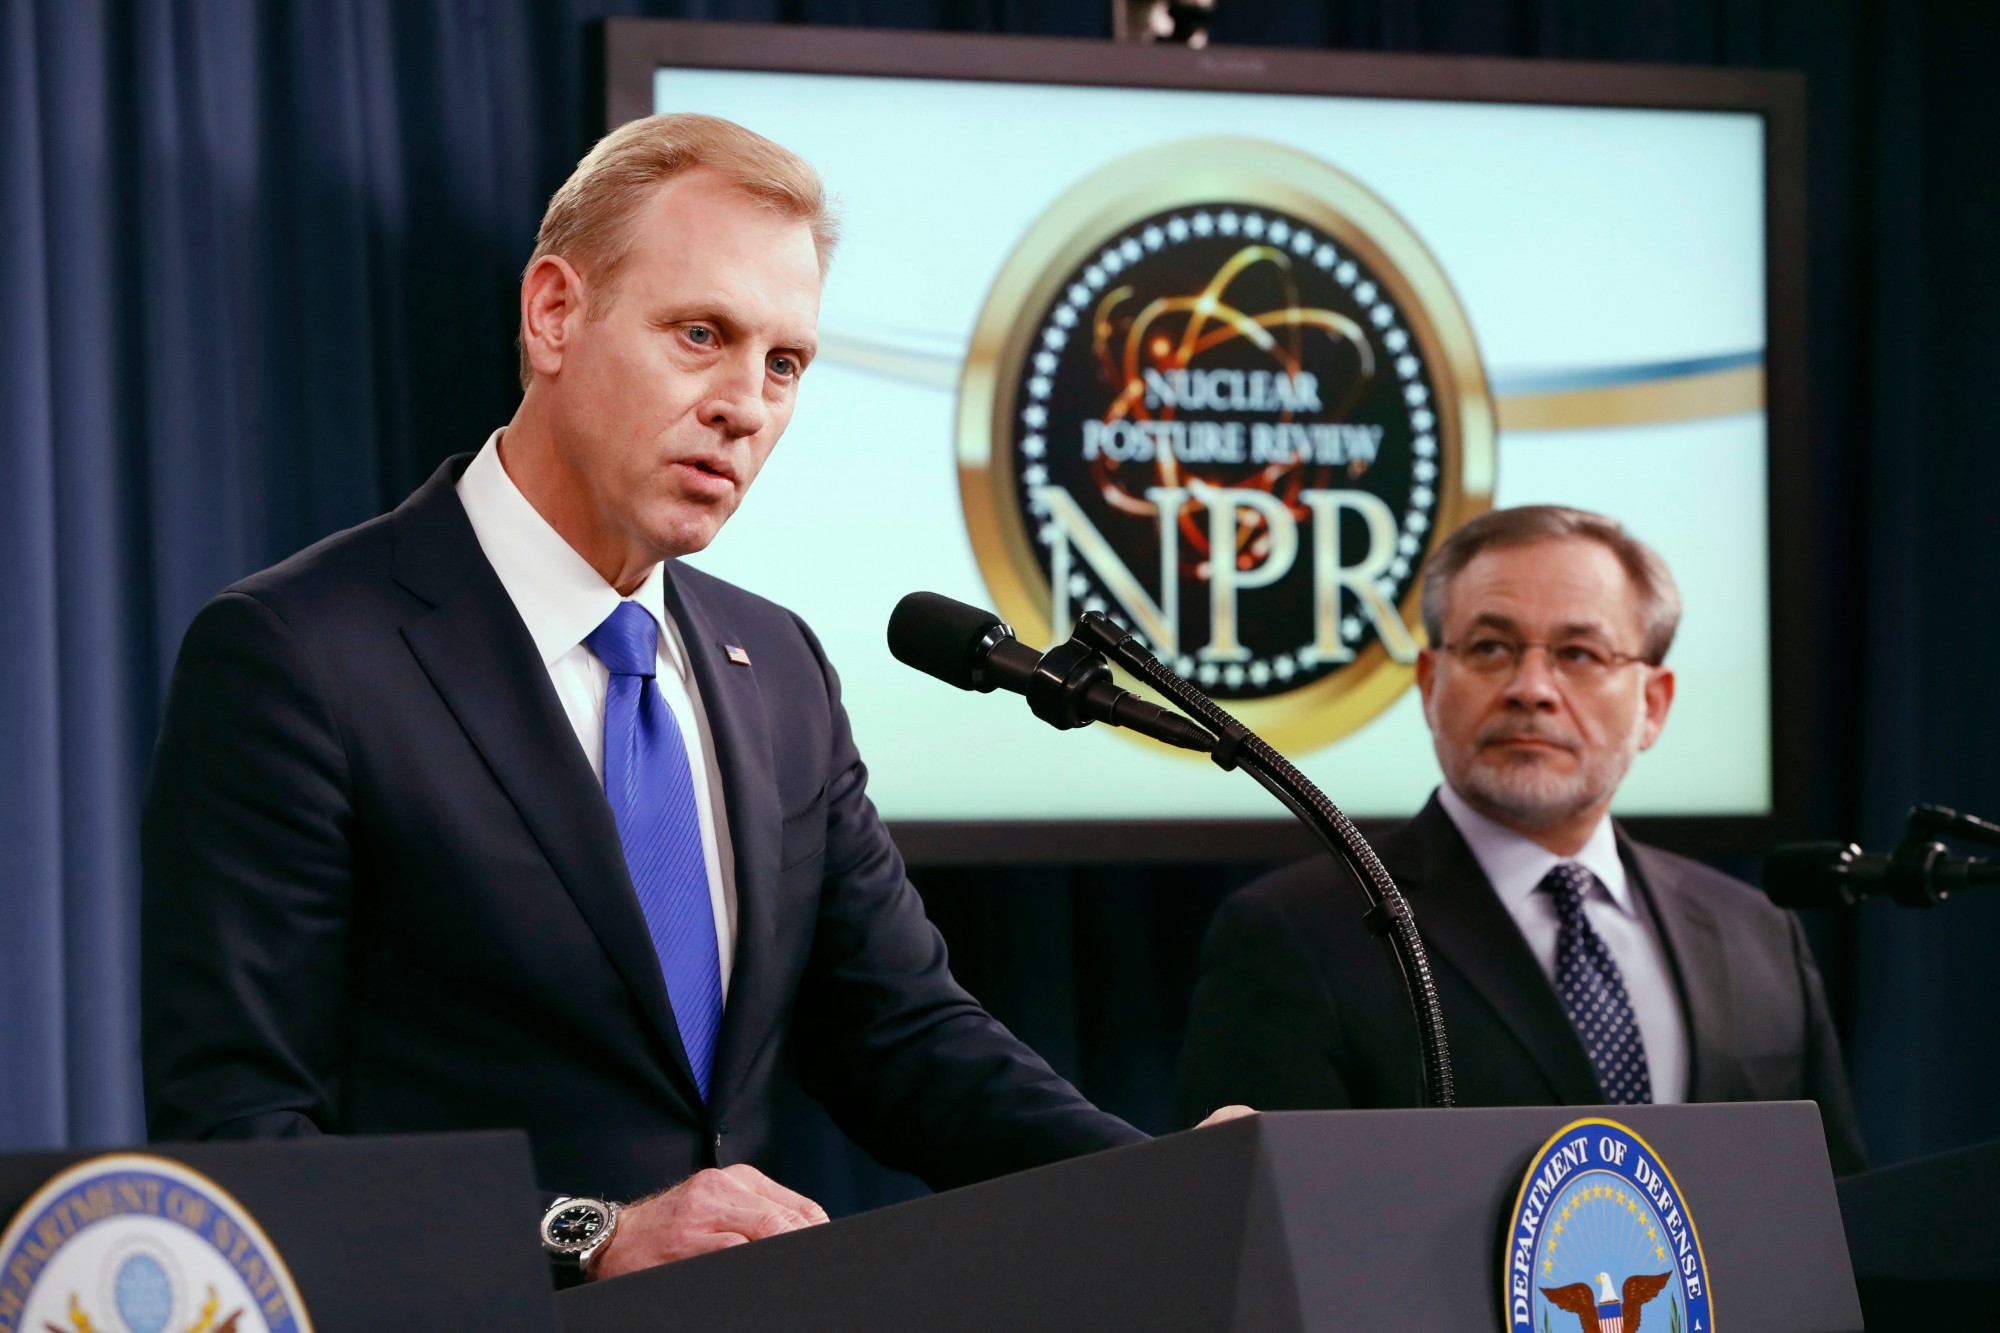 Deputy Defense Secretary Patrick Shanahan, left, speaks next to Deputy Energy Secretary Dan Brouillette, during a news conference on the 2018 Nuclear Posture Review at the Pentagon, Friday, Feb. 2, 2018. (AP Photo/Jacquelyn Martin) NUCLEAR POSTURE REVIEW